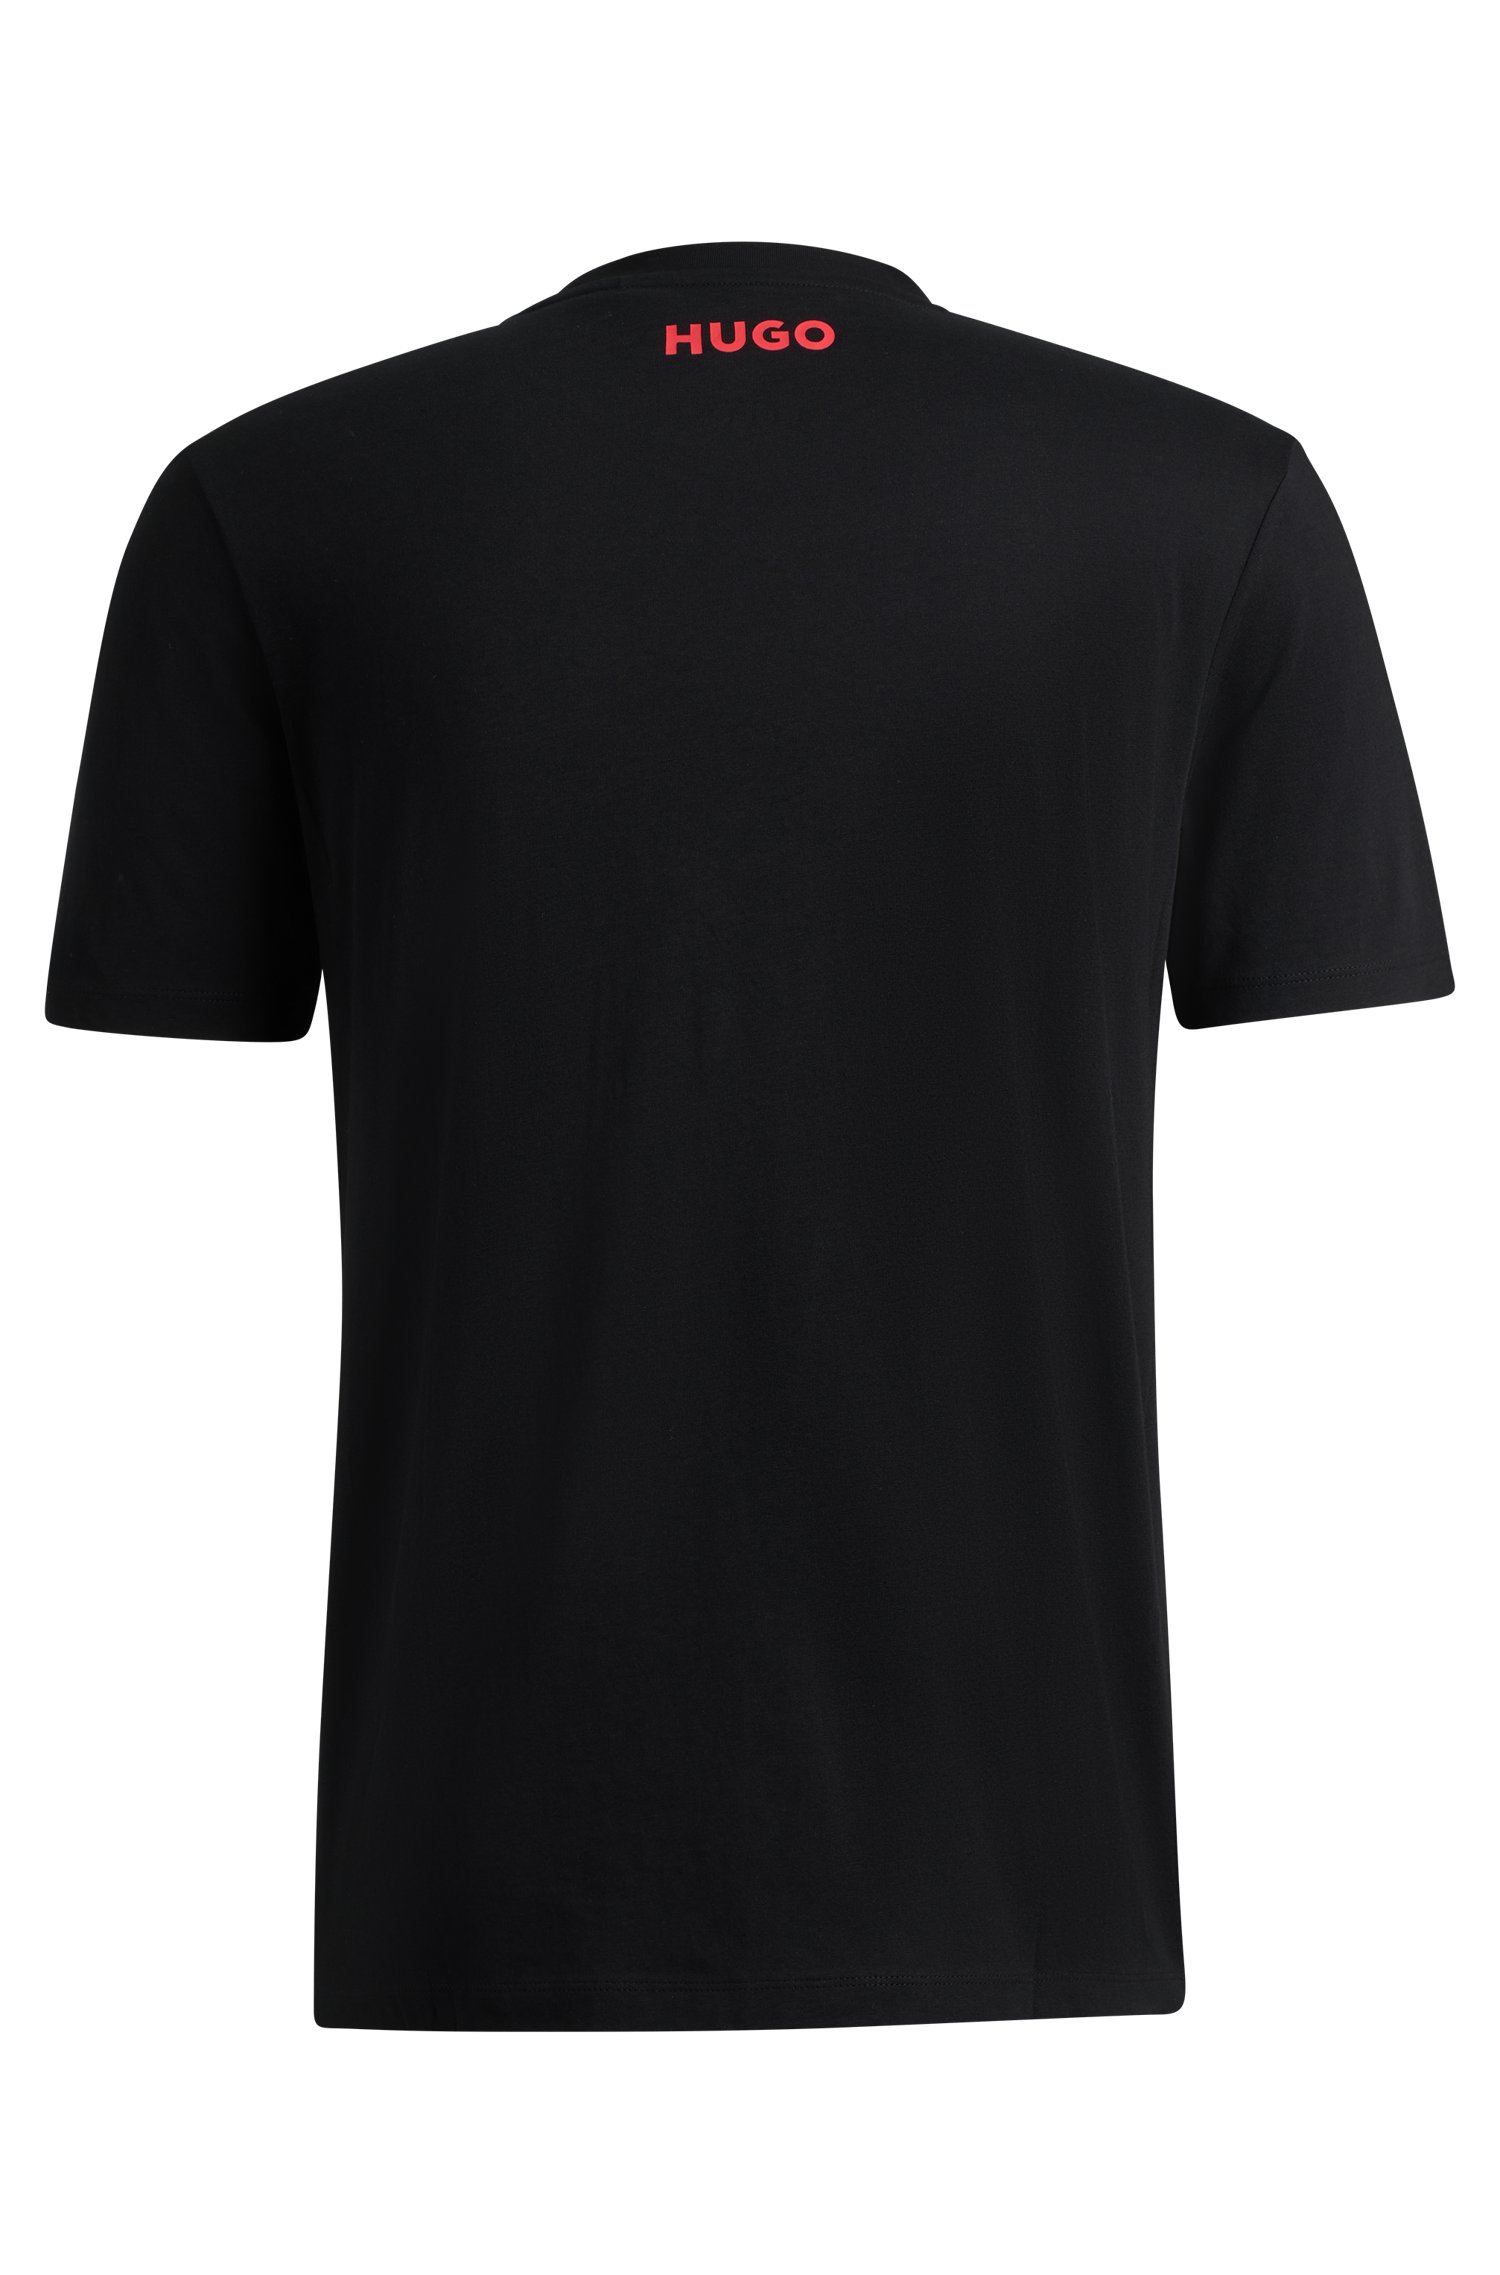 Cotton-jersey fanwear T-shirt with special branding